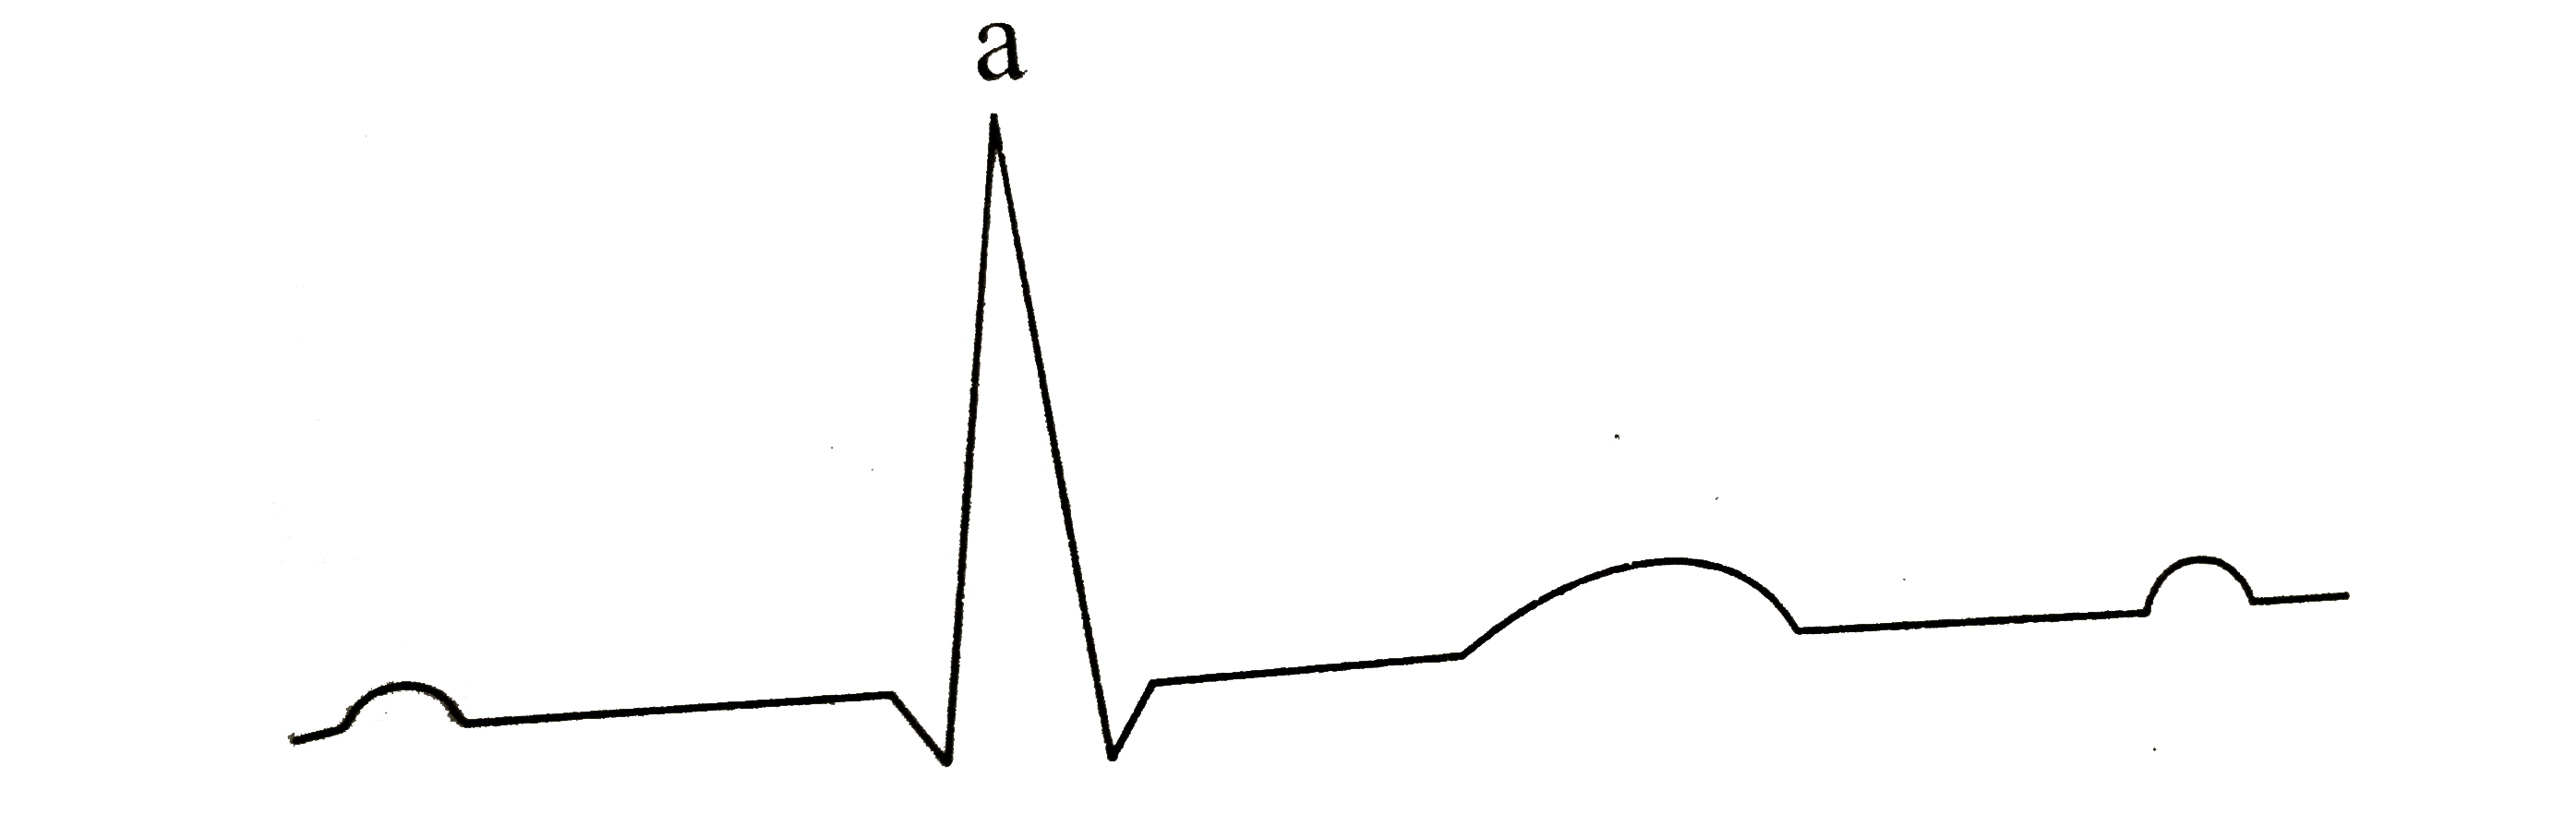 In this figure, peak point (a) is represented by letter